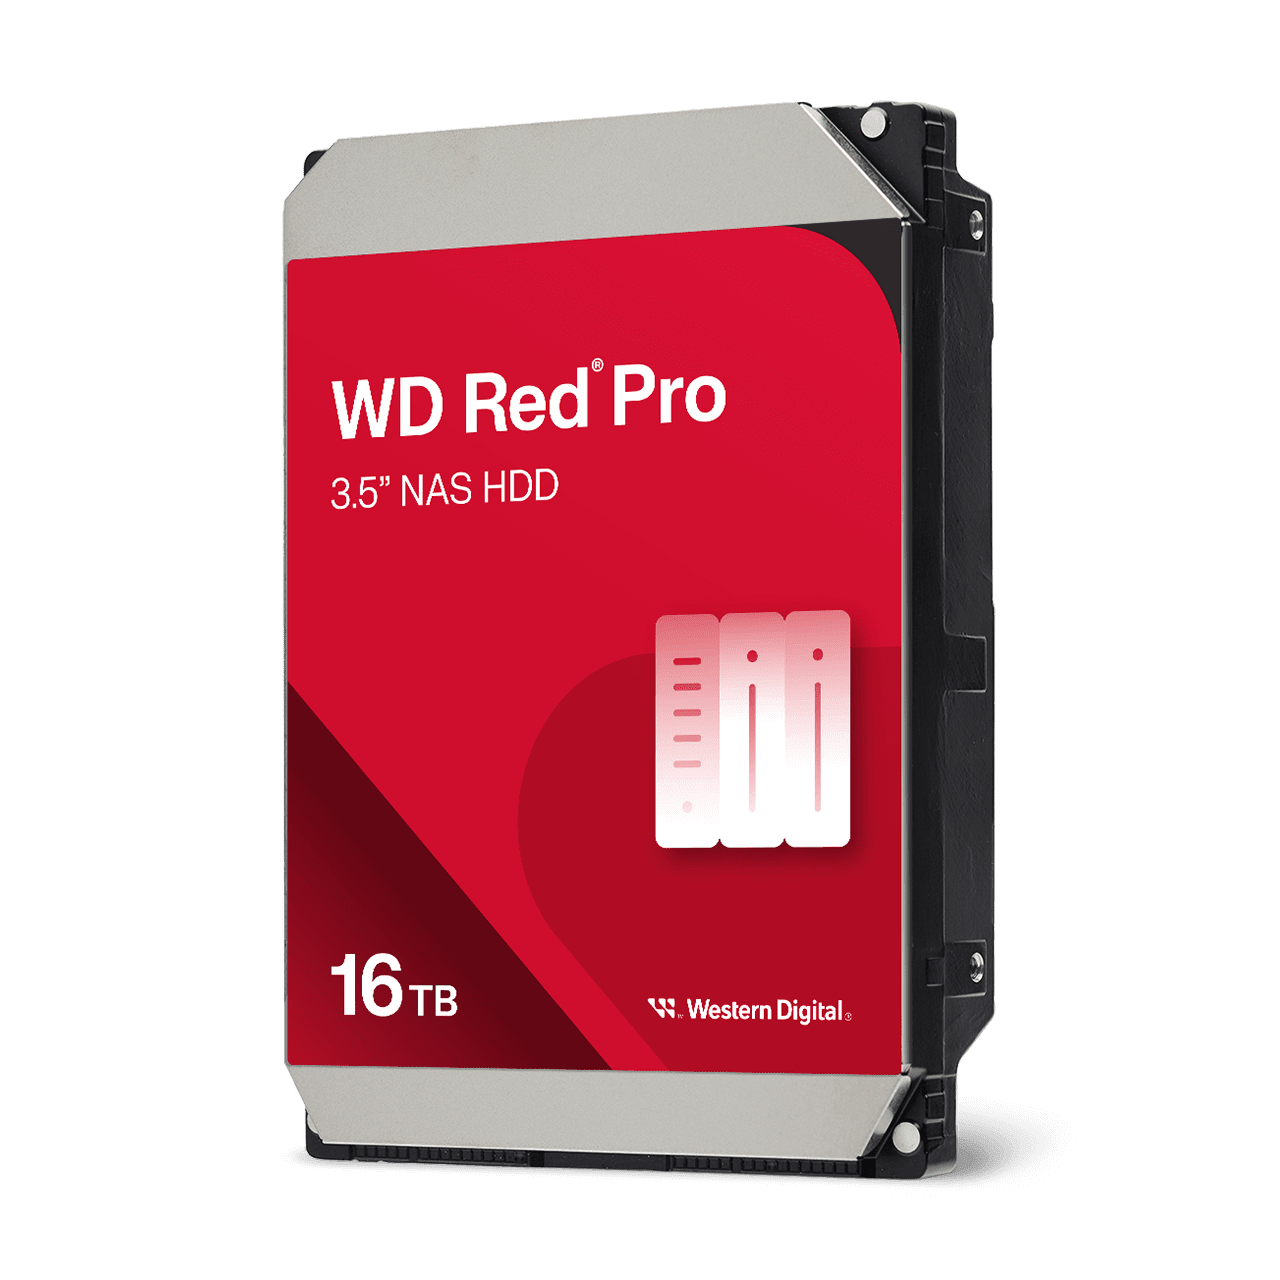 WD Red™ Pro 16TB NAS Hard Drive - Image8